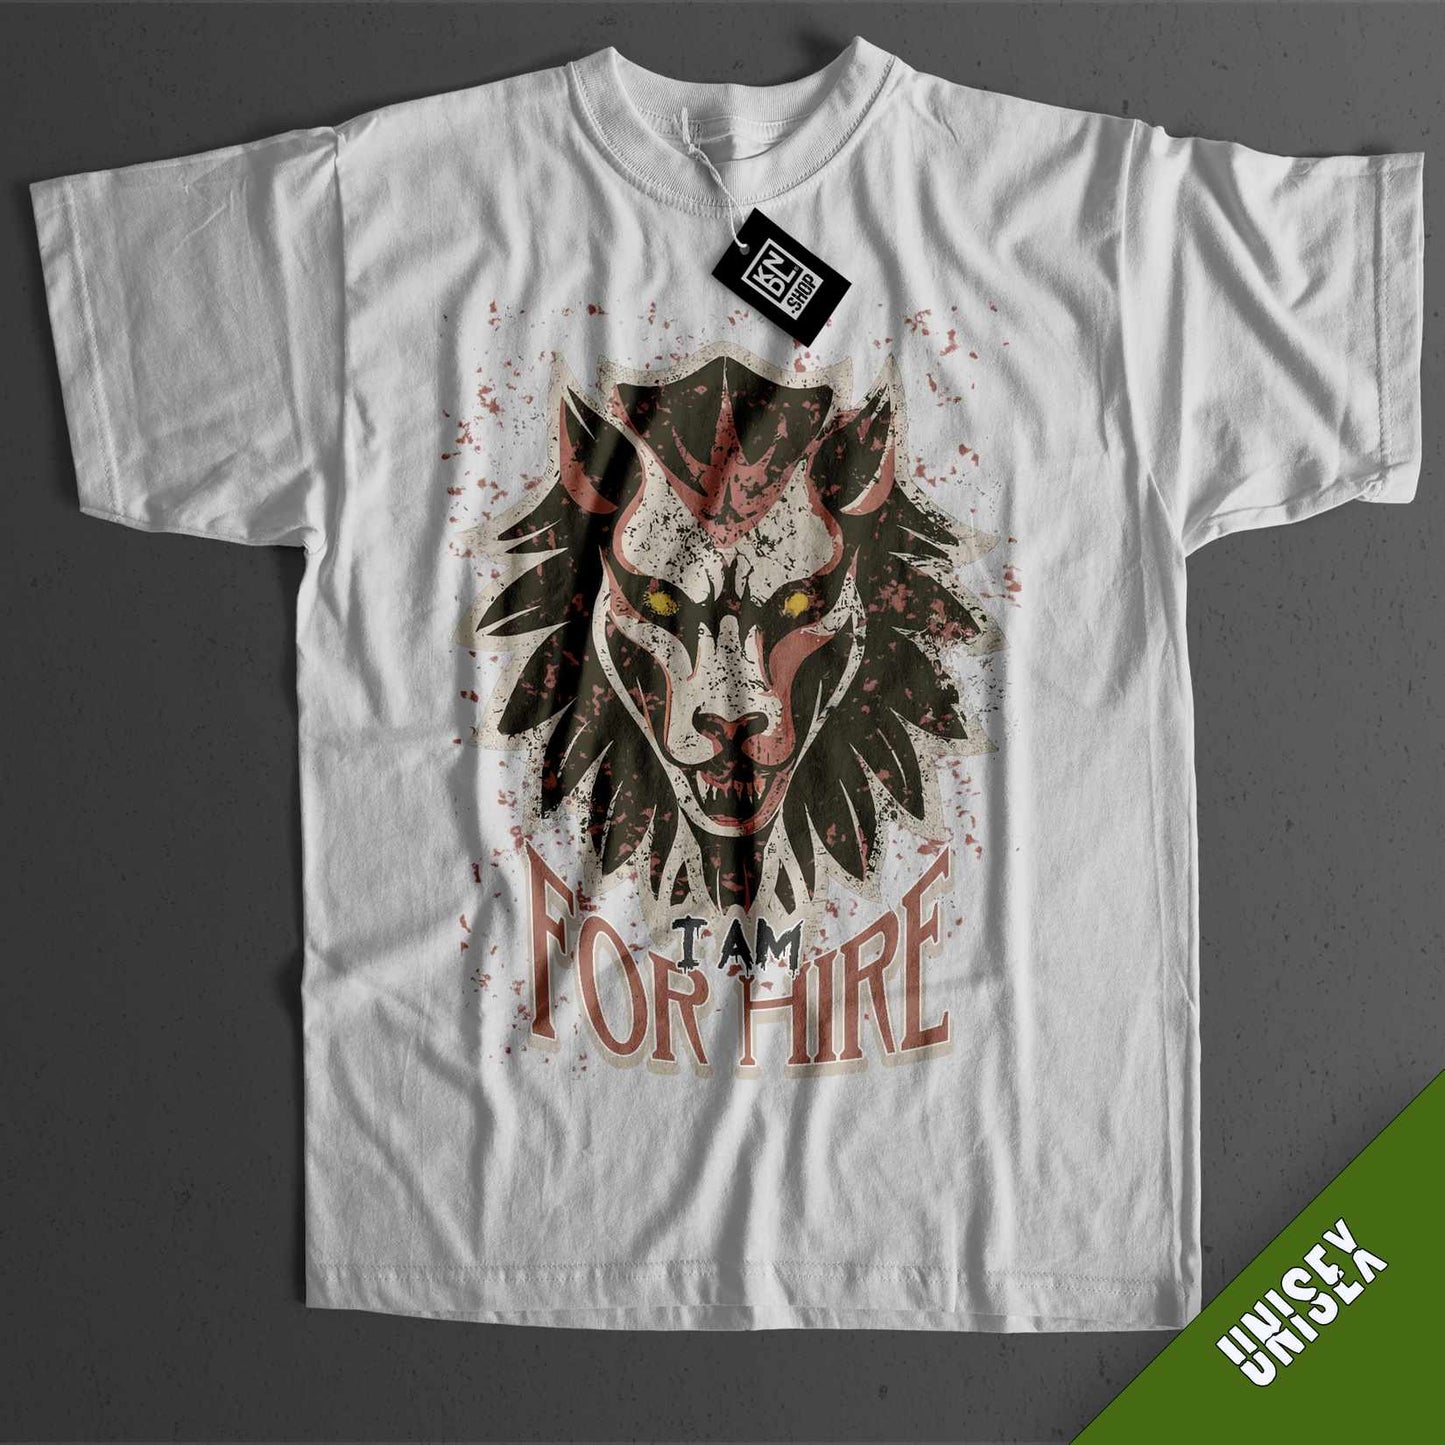 TEE NR 511 | I AM FOR HIRE | THE WITCHER INSPIRED SHORT SLEEVE T-SHIRT FOR M/F